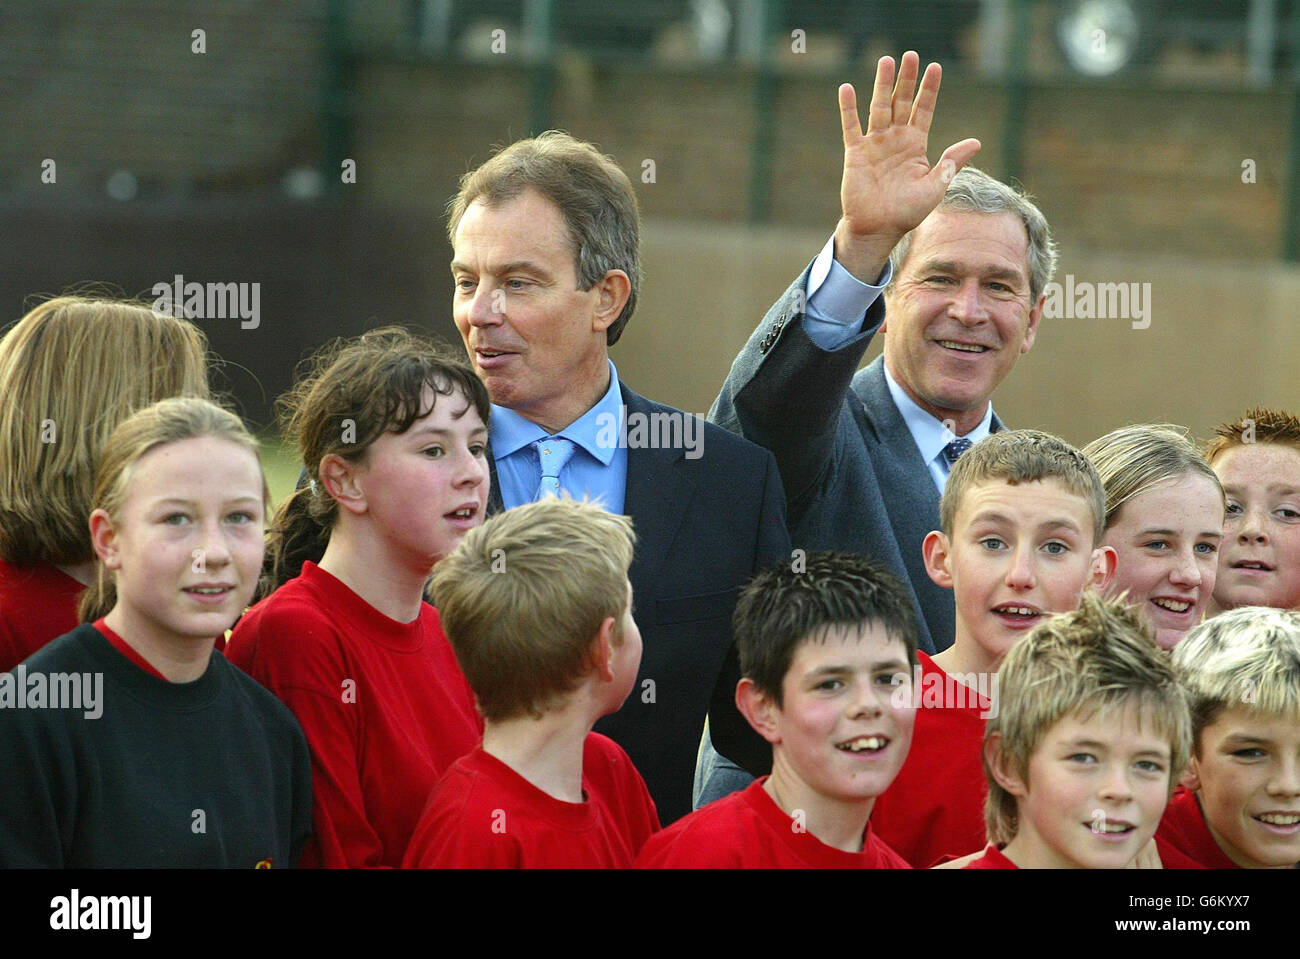 British Prime Minister Tony Blair alongside US President George Bush with school children from Sedgefield Community College, County Durham. It was understood that today's trip was designed to offer the chance for the Mr Blair and President Bush to spend time together in more relaxed conditions, following the high-profile speeches, political discussions and pageantry of the past two days. Stock Photo